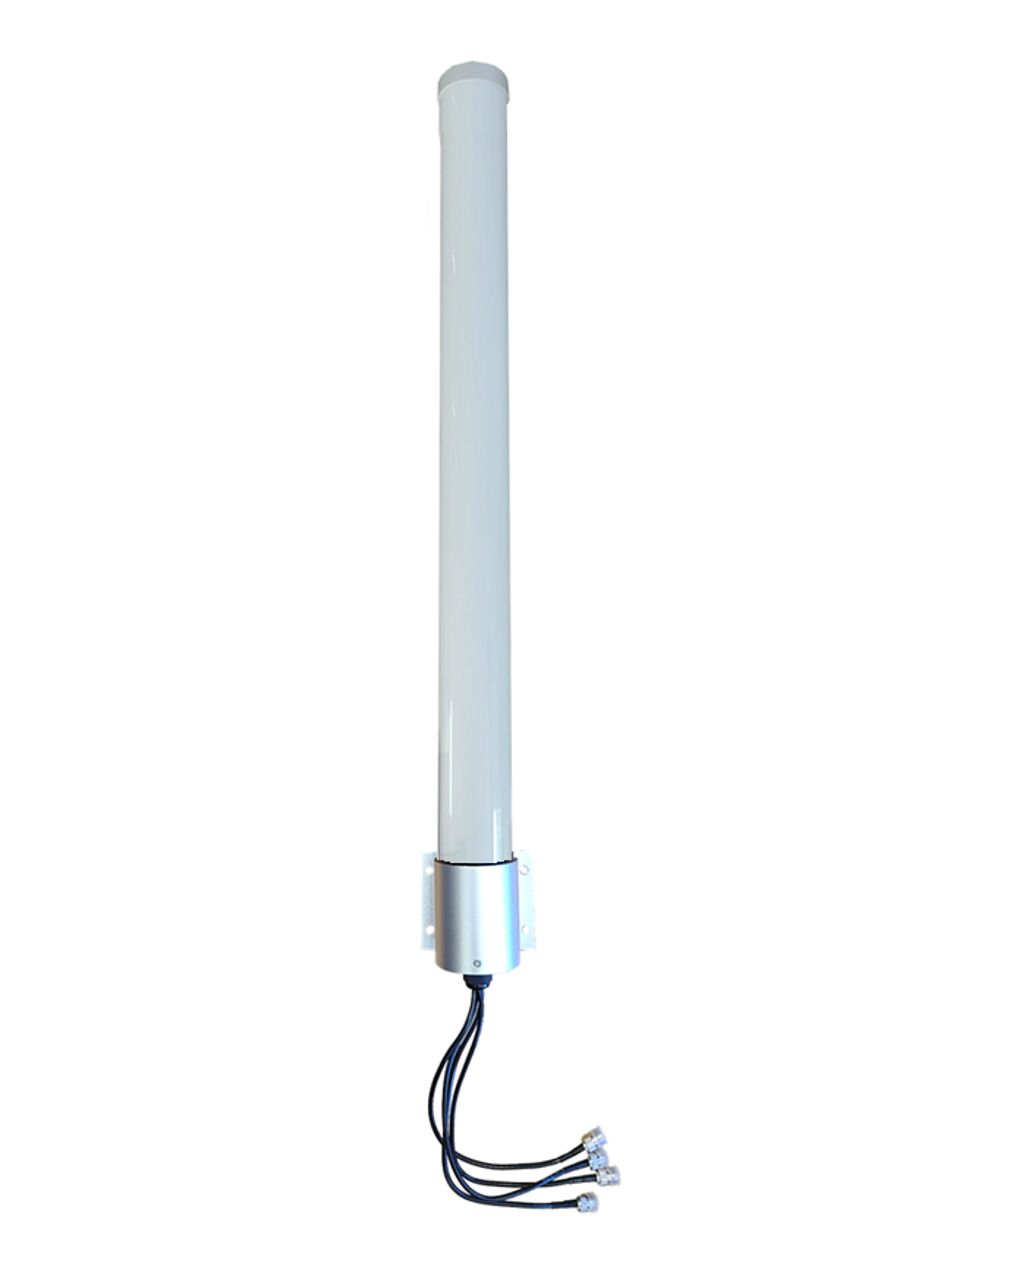 Cradlepoint W1850 Antenna - M79 Omni Directional MIMO 4 x Cellular 4G LTE CBRS 5G NR M2M IoT Bracket Mount Antenna w/4 x Coax Cables